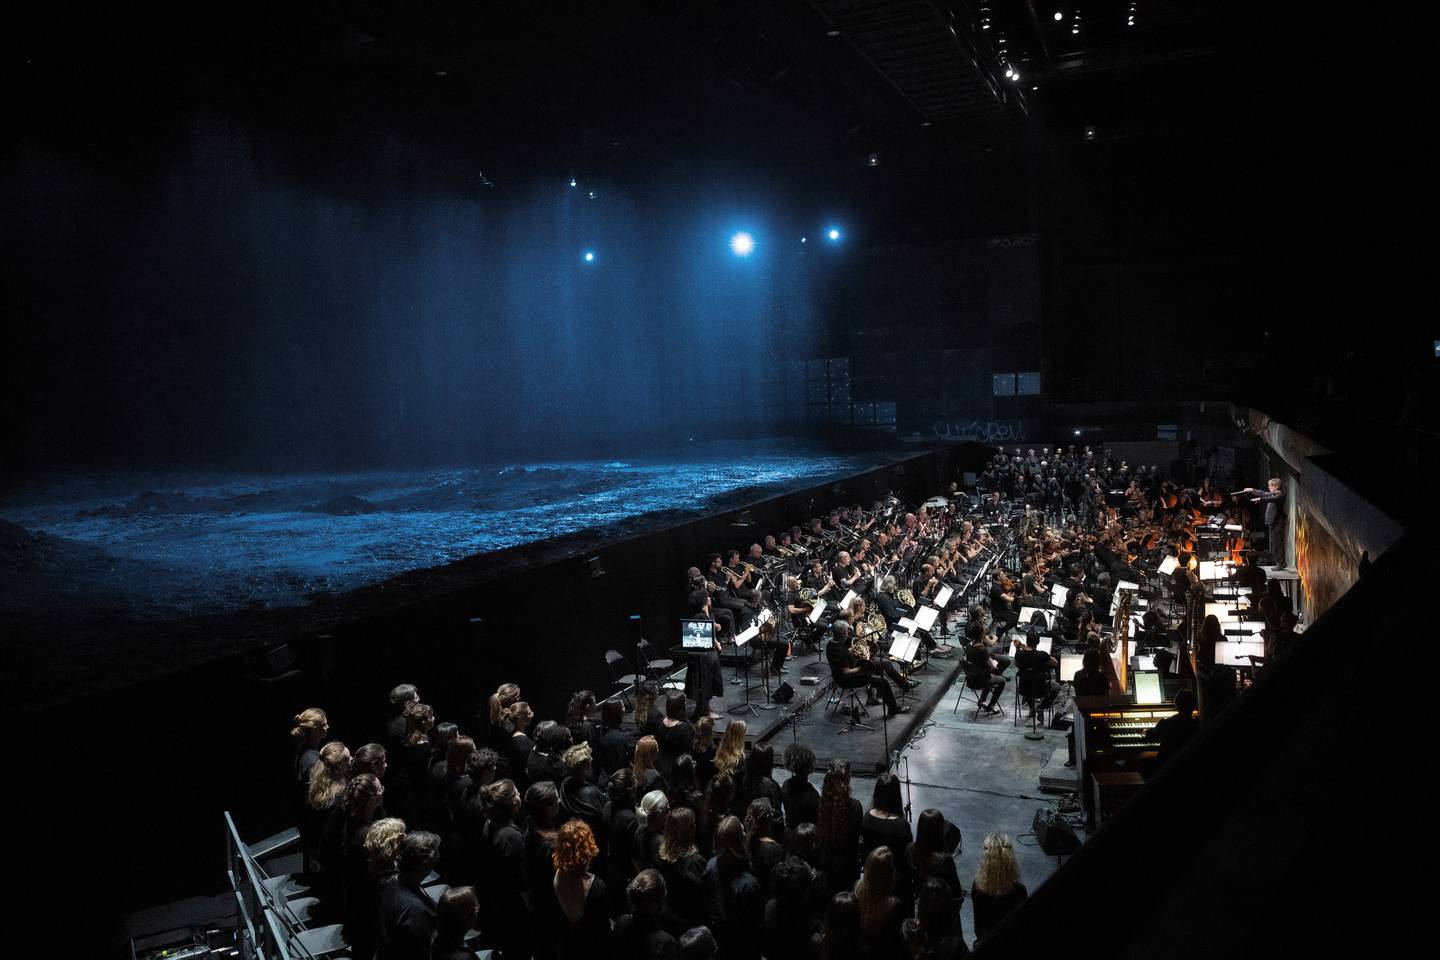 'Resurrection' at Festival d'Aix-en-Provence is being staged at the repurposed venue Stadium de Vitrolles. Photo: Monika Rittershaus